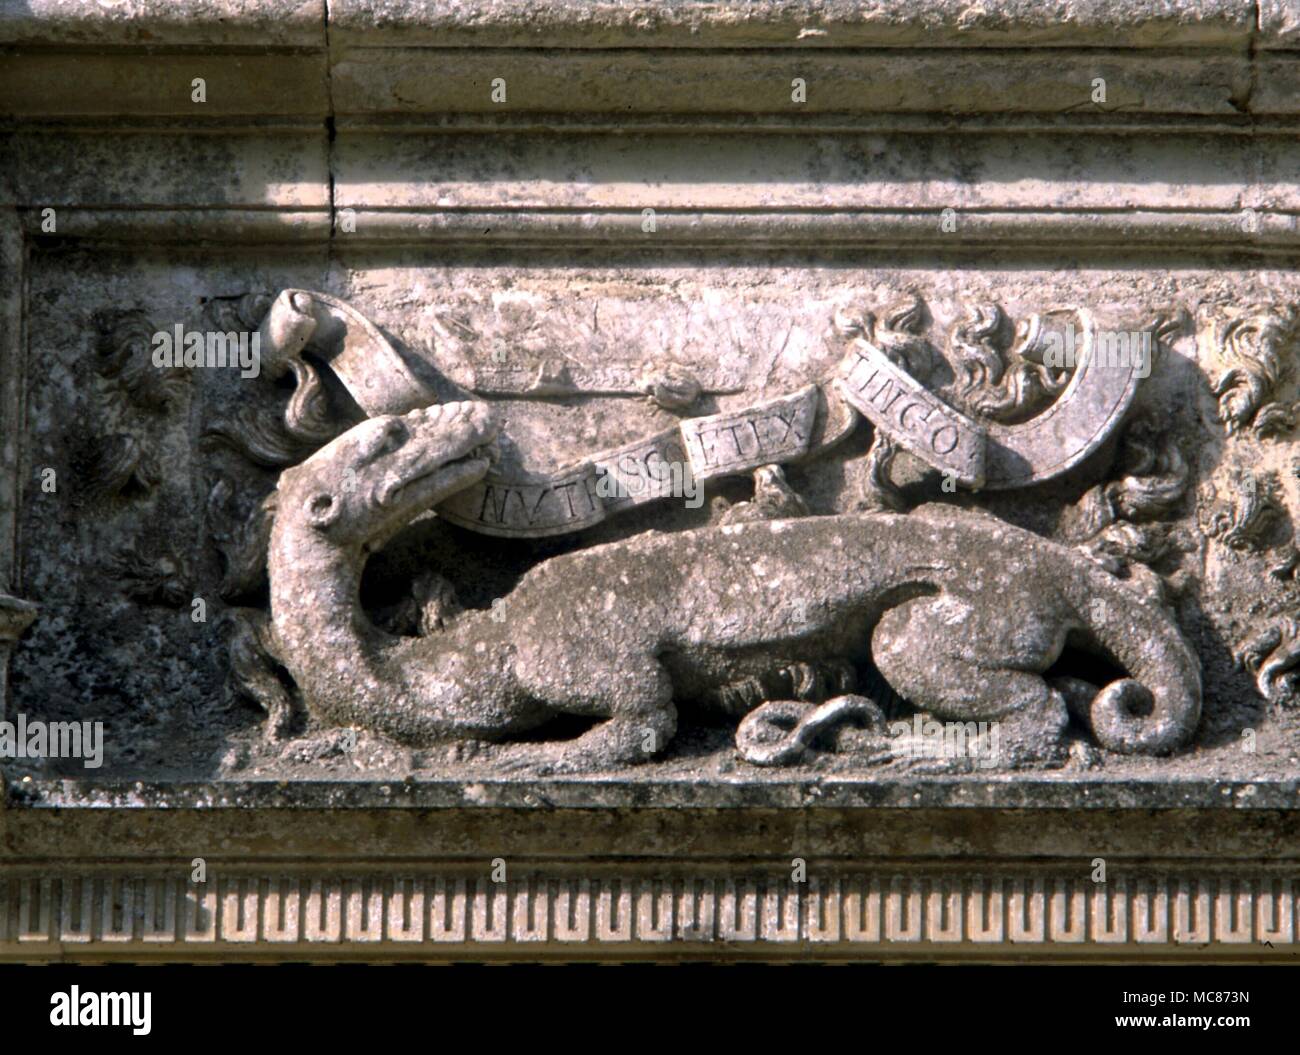 ANIMALS - Salamander, derived from an heraldic device, on the walls of the Chateau at Blois. 17th century design Stock Photo